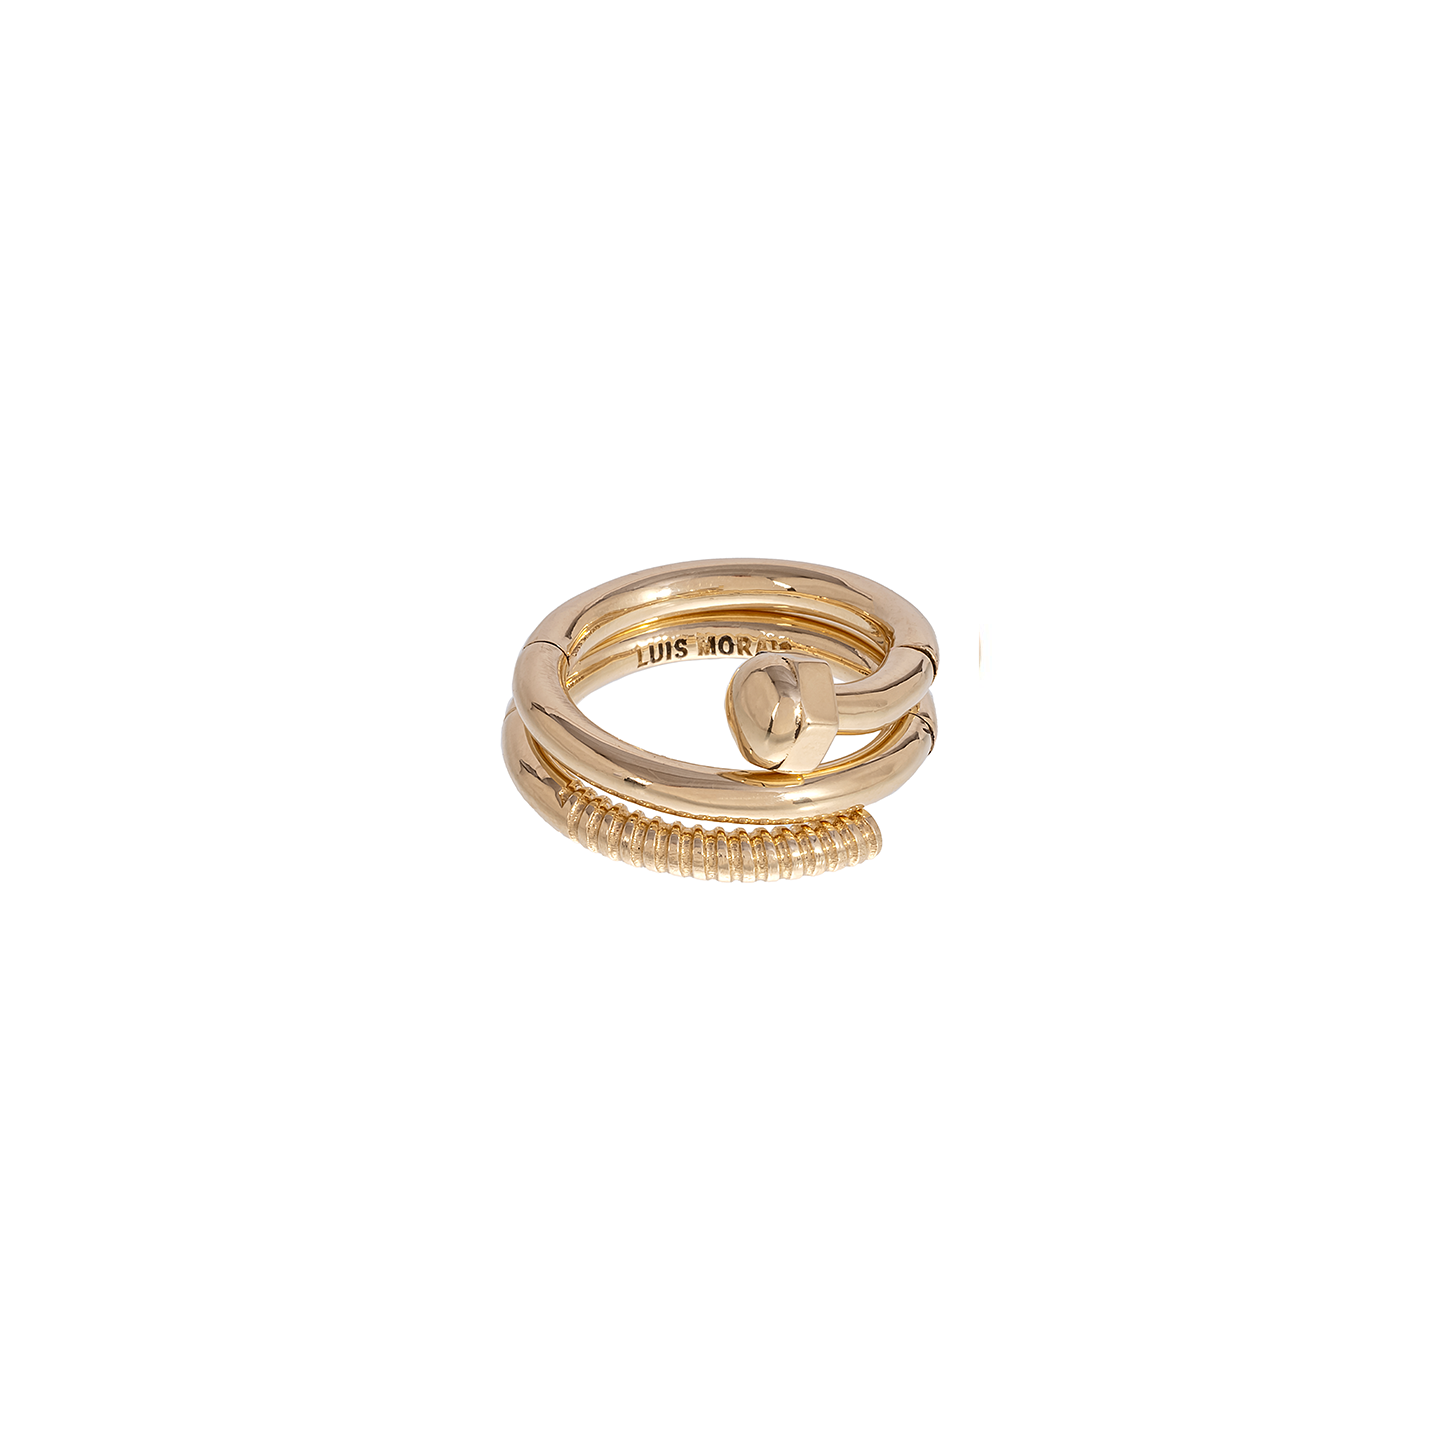 Luis Morais Gold Serpentine Ring with Screw Ends